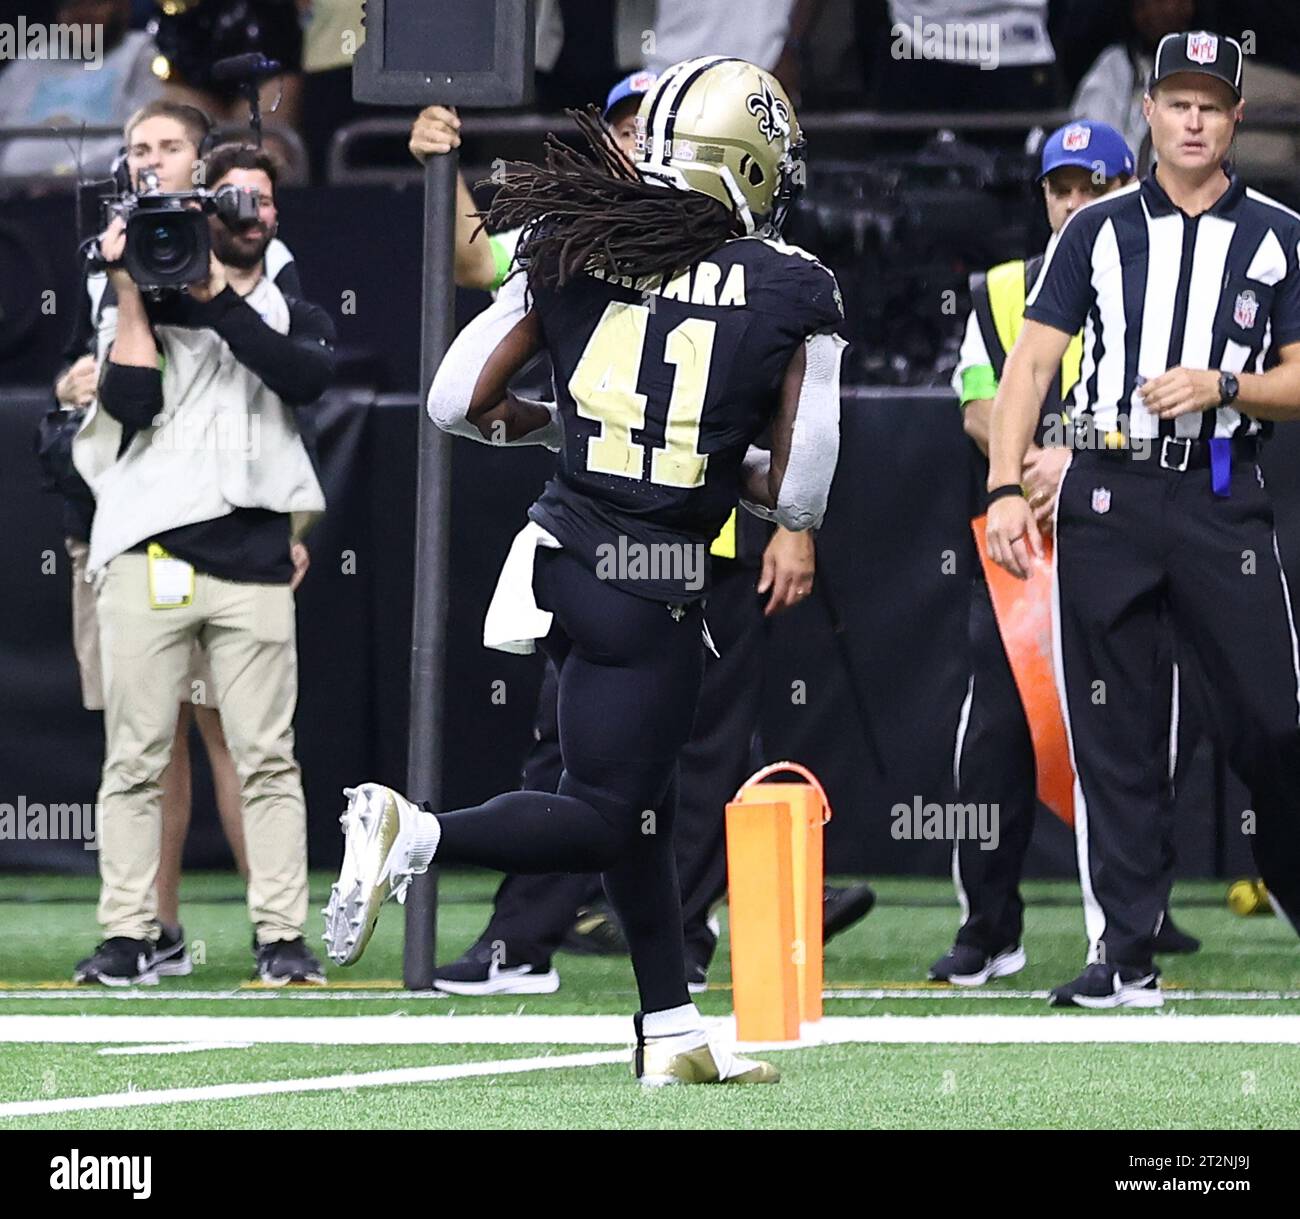 New Orleans, USA. 19th Oct, 2023. New Orleans Saints running back Alvin Kamara (41) catches this two point conversion for a score during the 6:38 mark in the fourth of a National Football League game at Caesars Superdome in New Orleans, Louisiana on Thursday, October 19, 2023. On this play, the Saints managed to tie the ball game after being down 24-9 in the fourth quarter. (Photo by Peter G. Forest/Sipa USA) Credit: Sipa USA/Alamy Live News Stock Photo